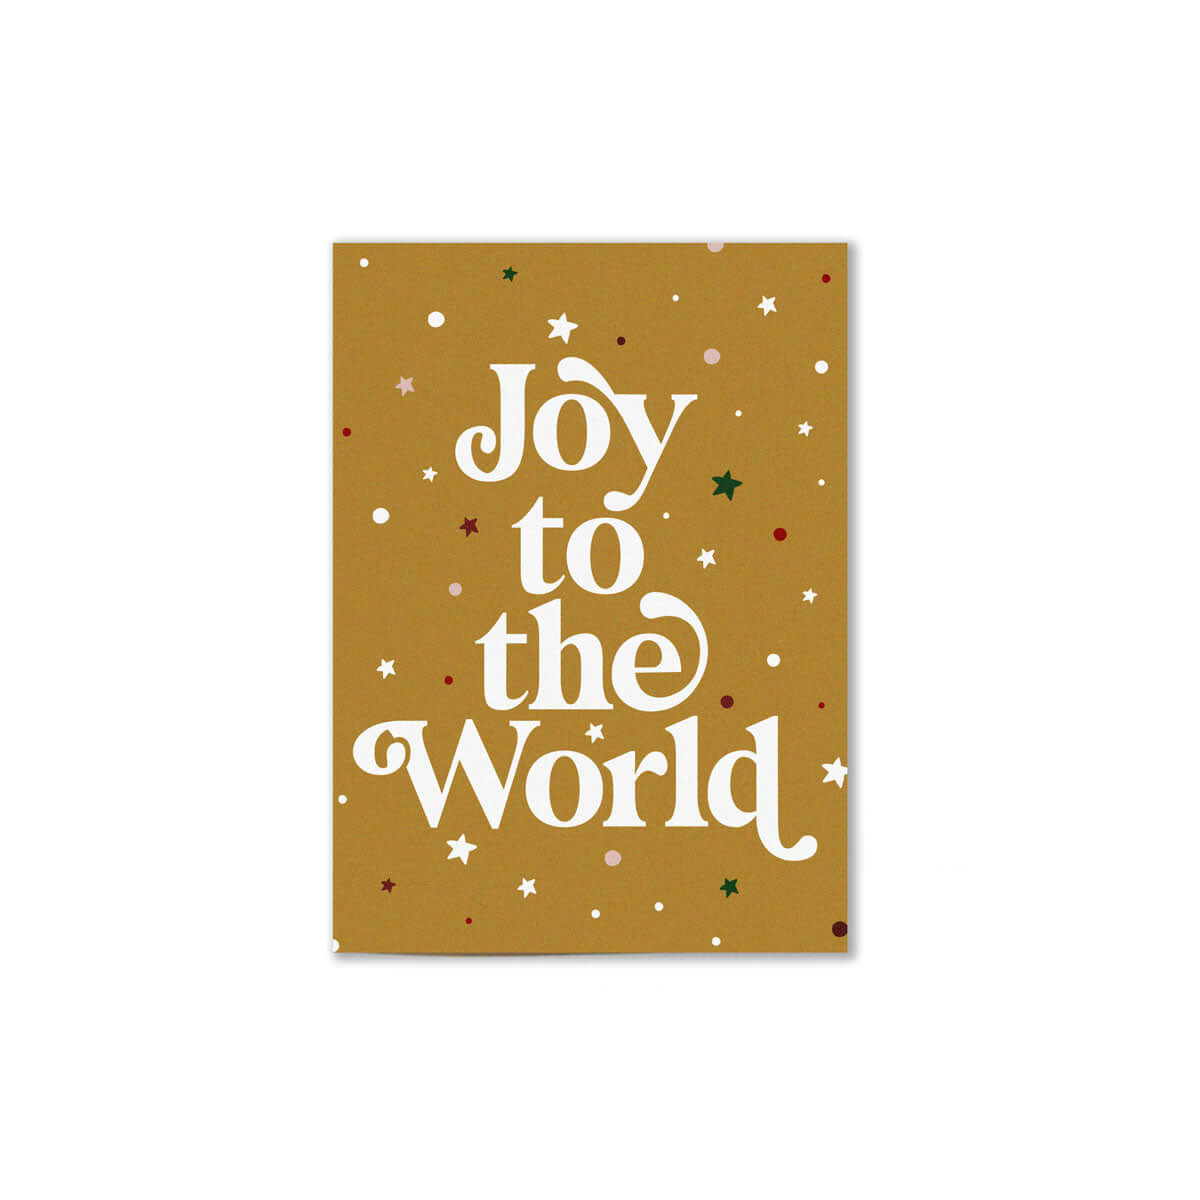 festive brownish gold card that reads "Joy to the World' in large white text with colorful stars in the background.